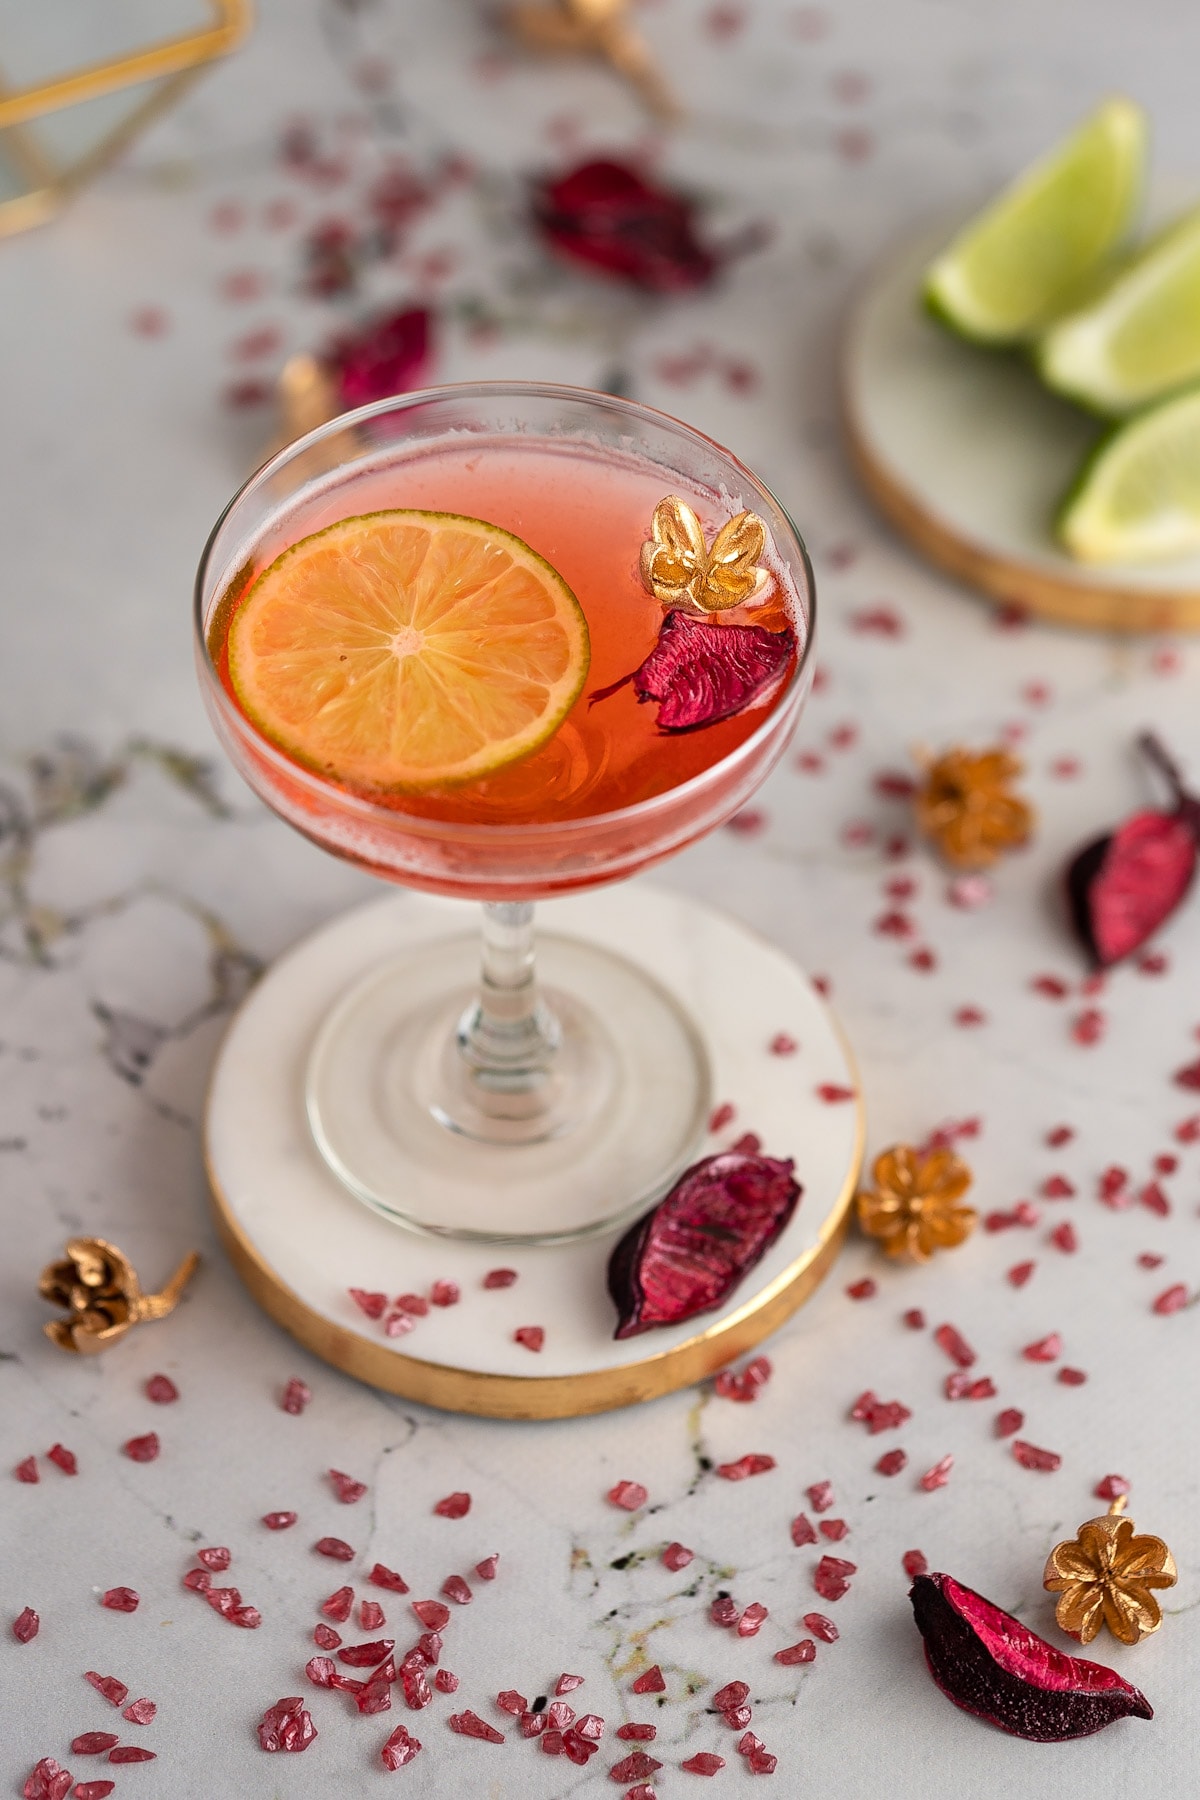 Strawberry gimlet on a white and gold coaster, on a marble table, with pink and gold flowers scattered around and sliced limes in the background.